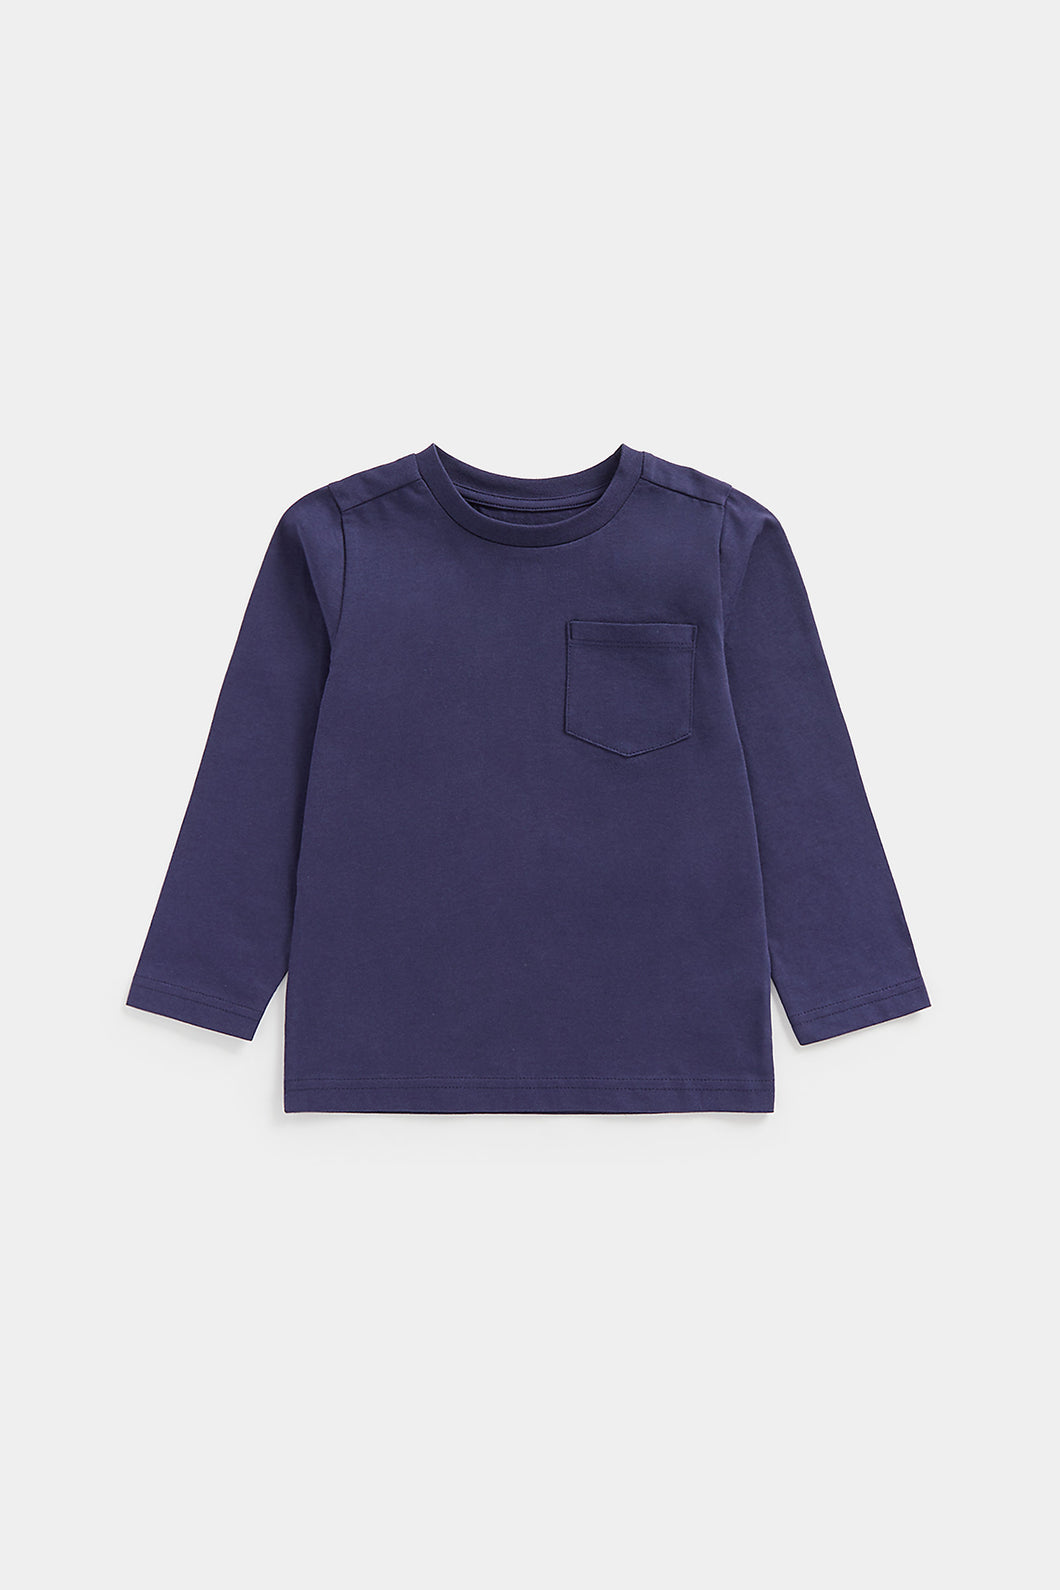 Mothercare Navy Long-Sleeved T-Shirt